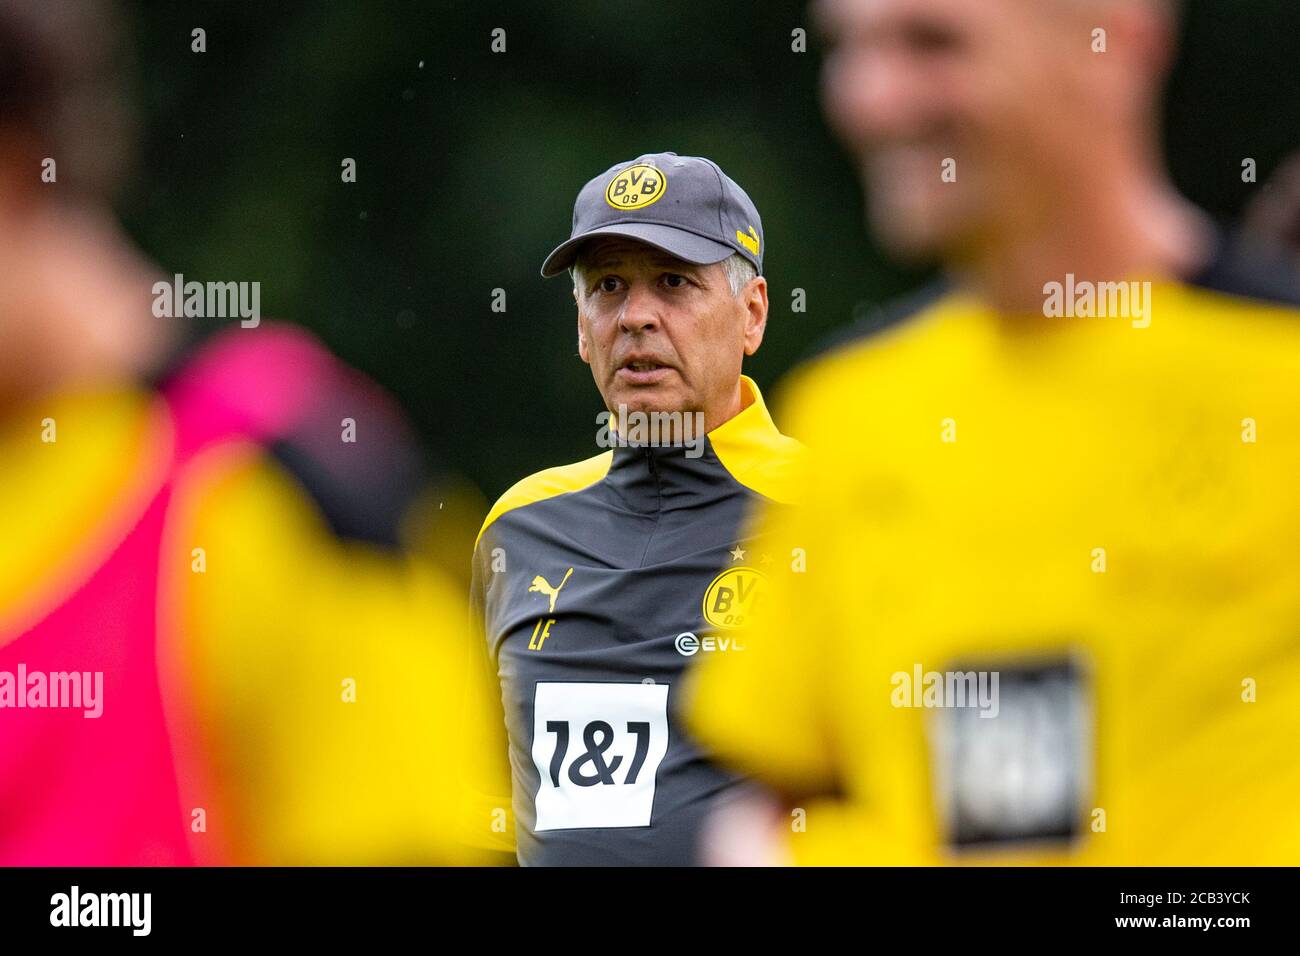 Bad Ragaz, Switzerland. 10th Aug, 2020. Football: Bundesliga, training camp  of Borussia Dortmund. Coach Lucien Favre watches the training. Credit:  David Inderlied/dpa - IMPORTANT NOTE: In accordance with the regulations of  the